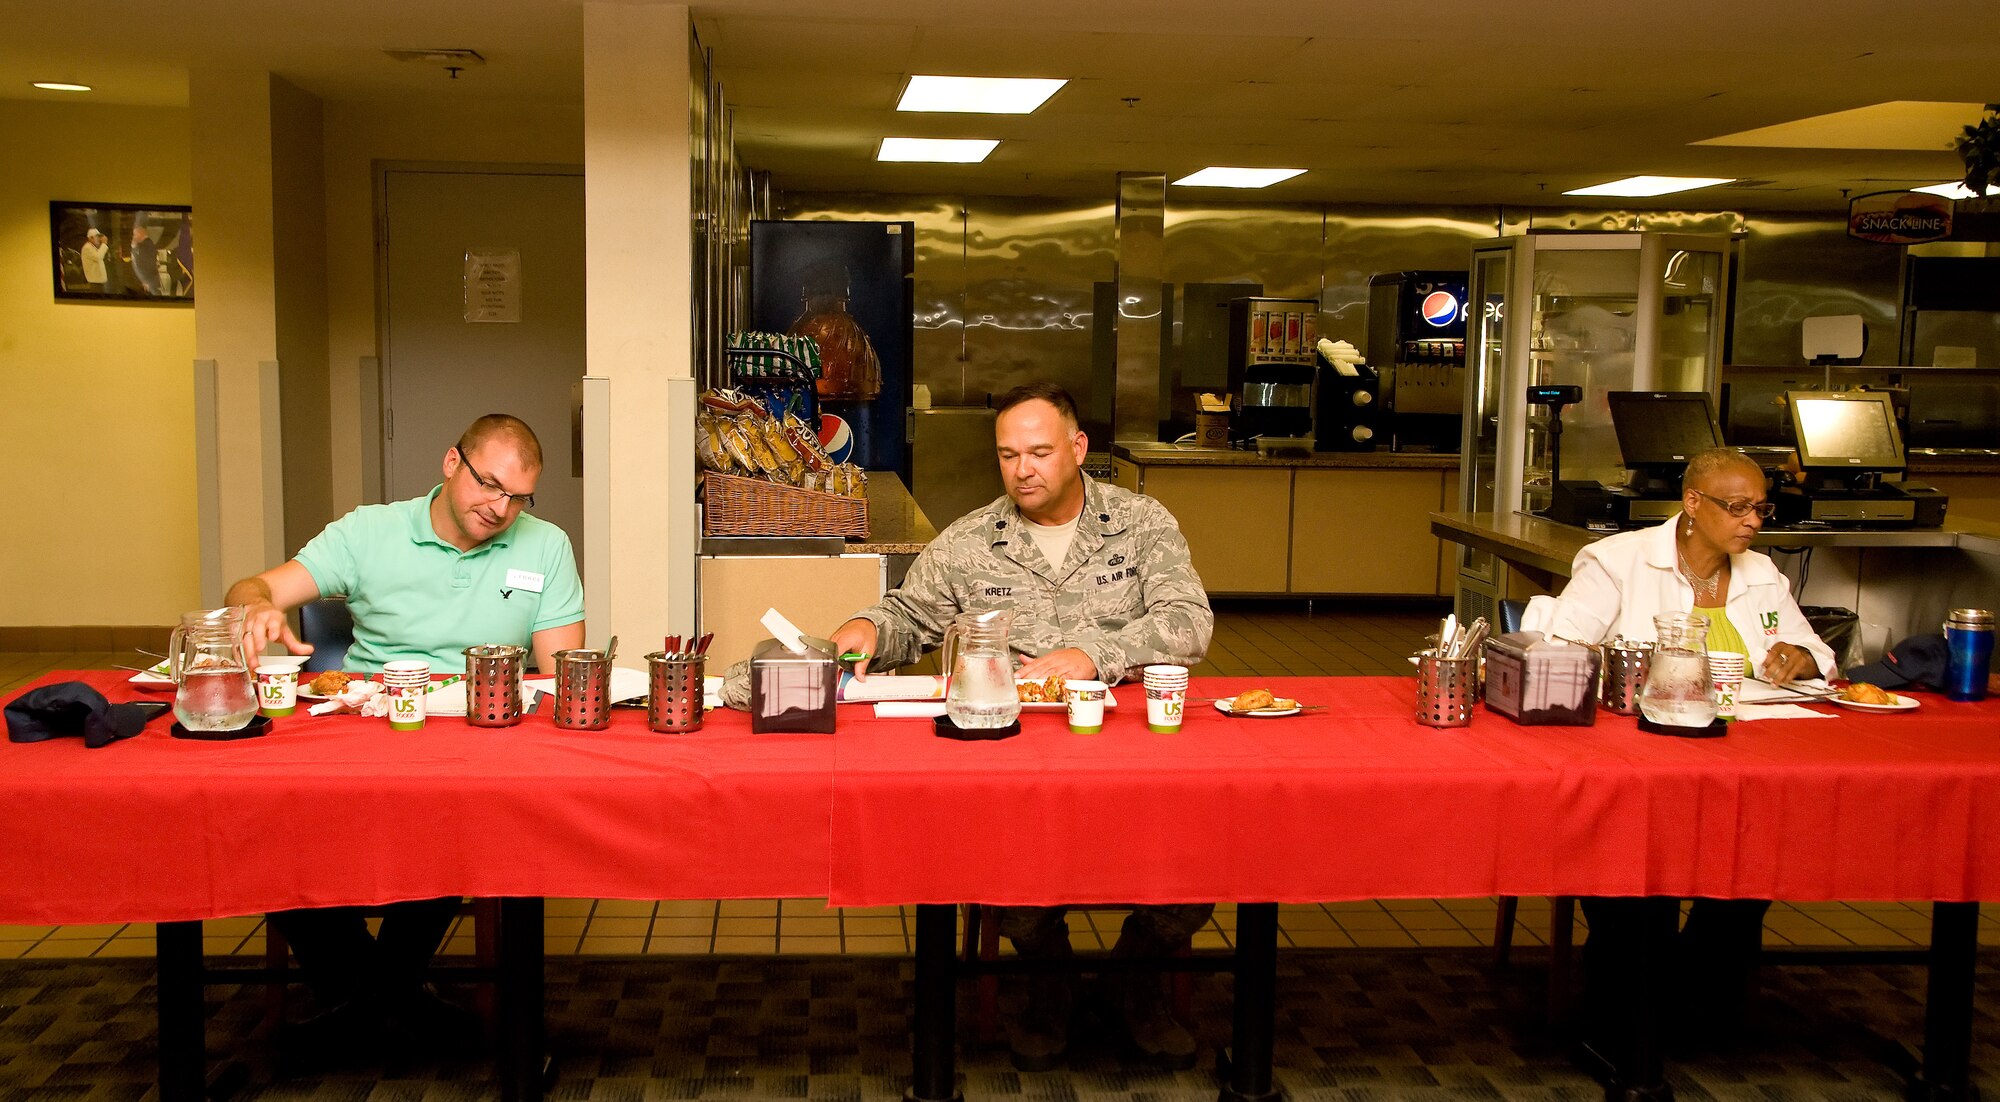 Jeffrey Moore, left, 436th Force Support Squadron bowling center manager; Lt. Col. David Kretz, center, Air Force Mortuary Affairs Operations deputy commander; and Sheila Harris, US Foods military account manager, sit at the judges table scoring the appetizer entries July 24, 2014, at the Patterson Dining Facility on Dover Air Force Base, Del. Judges also scored entrée and dessert items presented to them during the Dover Iron Chef competition. (U.S. Air Force photo/Roland Balik)